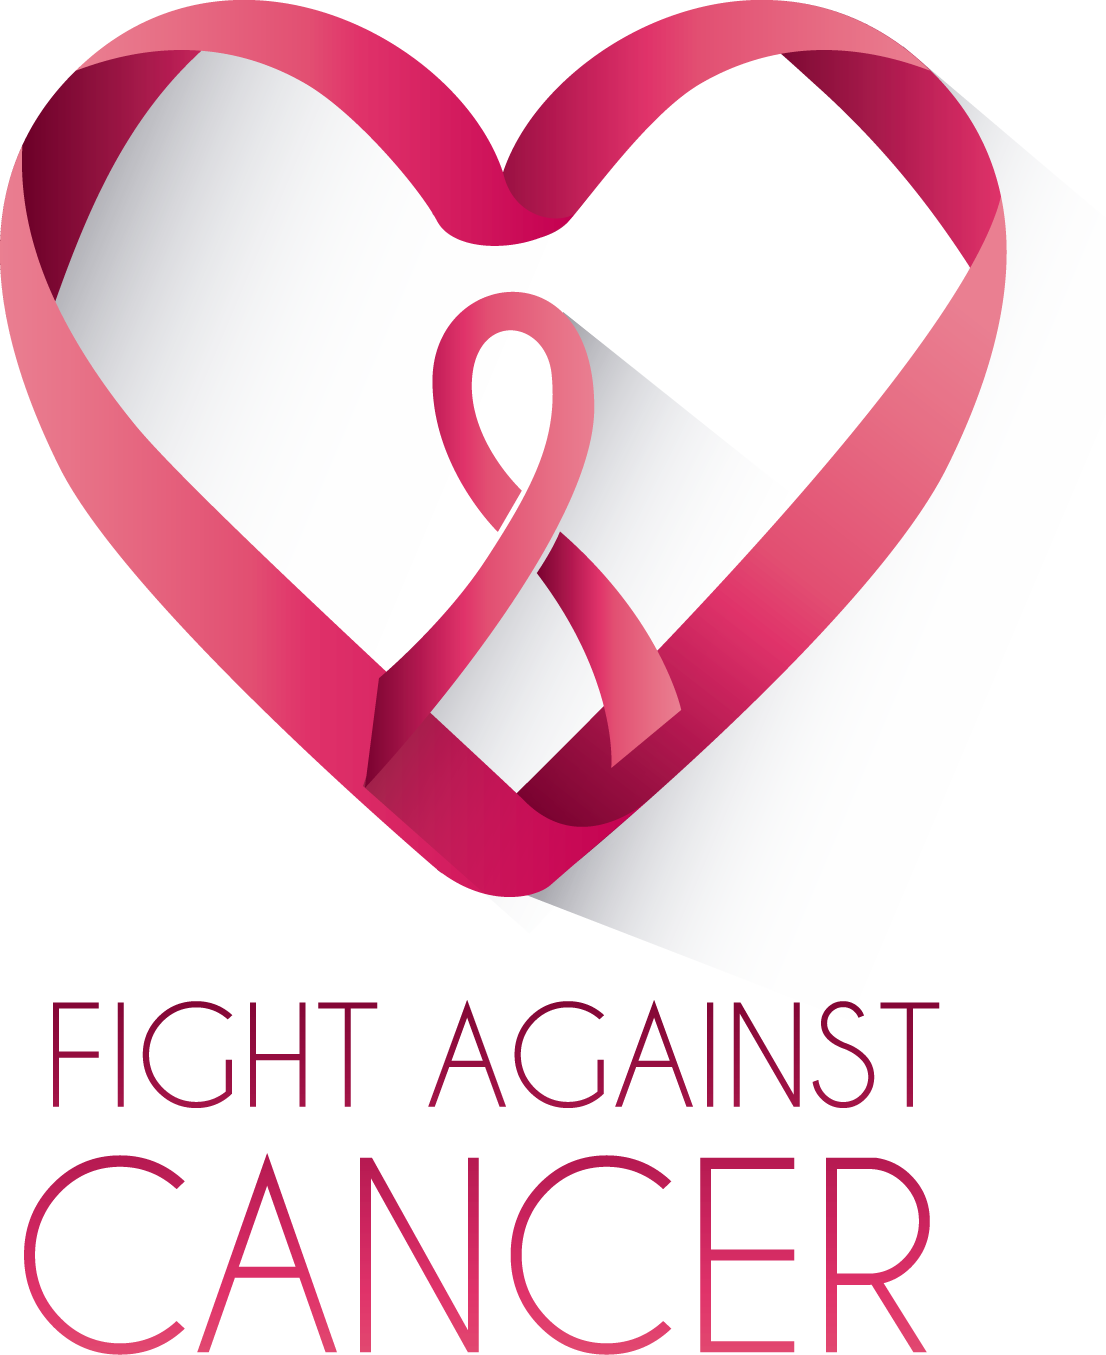 Download Fight Against Cancer symbol PNG Image - PurePNG | Free ...